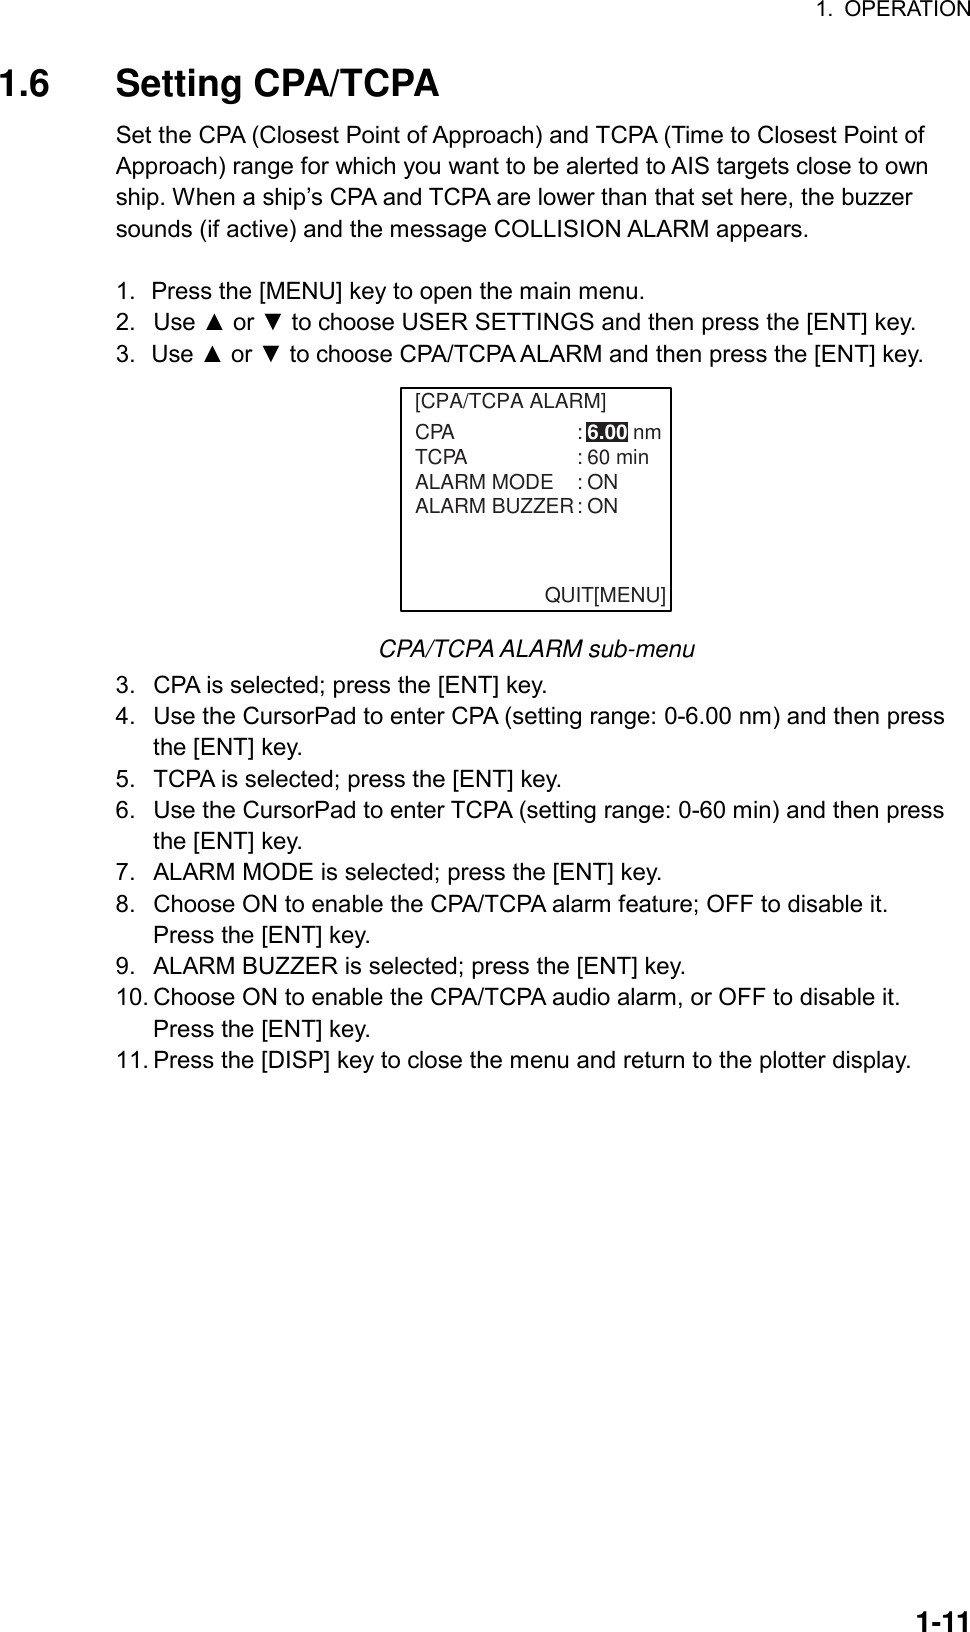 1. OPERATION  1-111.6 Setting CPA/TCPA Set the CPA (Closest Point of Approach) and TCPA (Time to Closest Point of Approach) range for which you want to be alerted to AIS targets close to own ship. When a ship’s CPA and TCPA are lower than that set here, the buzzer sounds (if active) and the message COLLISION ALARM appears.  1.  Press the [MENU] key to open the main menu. 2. Use ▲ or ▼ to choose USER SETTINGS and then press the [ENT] key. 3. Use ▲ or ▼ to choose CPA/TCPA ALARM and then press the [ENT] key. [CPA/TCPA ALARM]CPA : 6.00 nmTCPA : 60 minALARM MODE : ONALARM BUZZER: ONQUIT[MENU] CPA/TCPA ALARM sub-menu 3.  CPA is selected; press the [ENT] key. 4.  Use the CursorPad to enter CPA (setting range: 0-6.00 nm) and then press the [ENT] key. 5.  TCPA is selected; press the [ENT] key. 6.  Use the CursorPad to enter TCPA (setting range: 0-60 min) and then press the [ENT] key. 7.  ALARM MODE is selected; press the [ENT] key. 8.  Choose ON to enable the CPA/TCPA alarm feature; OFF to disable it. Press the [ENT] key. 9.  ALARM BUZZER is selected; press the [ENT] key. 10. Choose ON to enable the CPA/TCPA audio alarm, or OFF to disable it. Press the [ENT] key. 11. Press the [DISP] key to close the menu and return to the plotter display. 